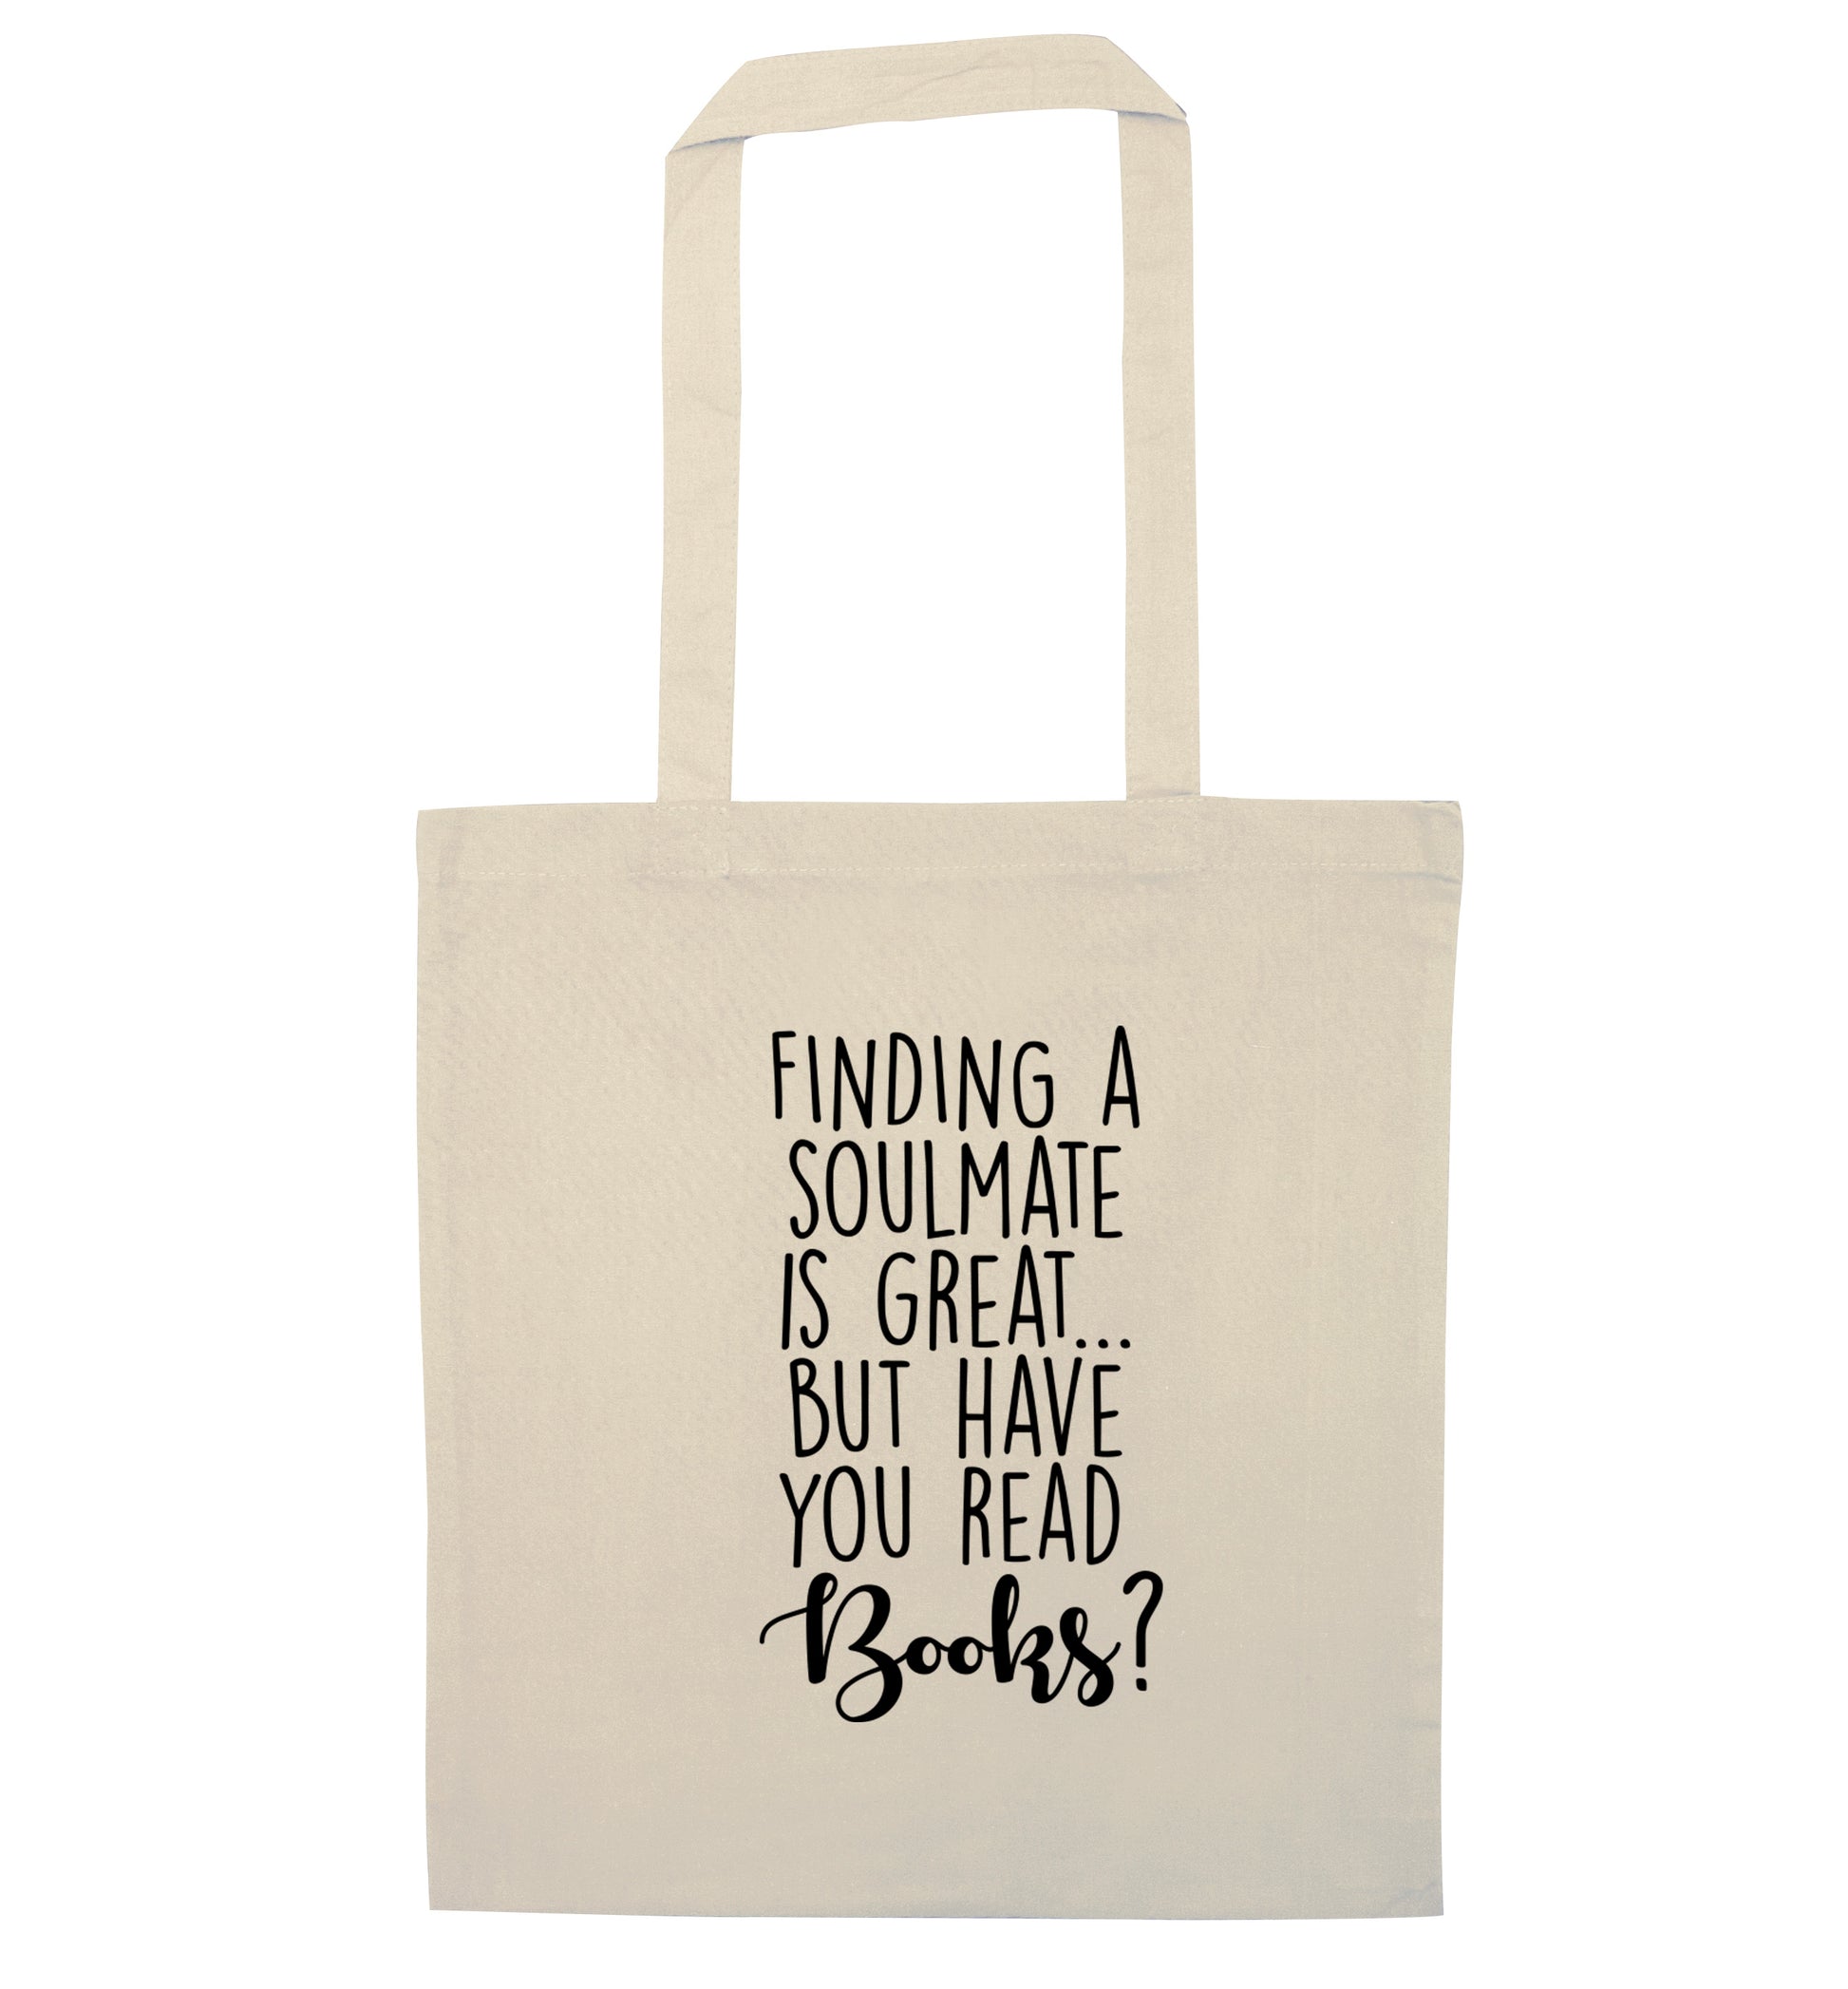 Finding a soulmate is great but have you read books? natural tote bag